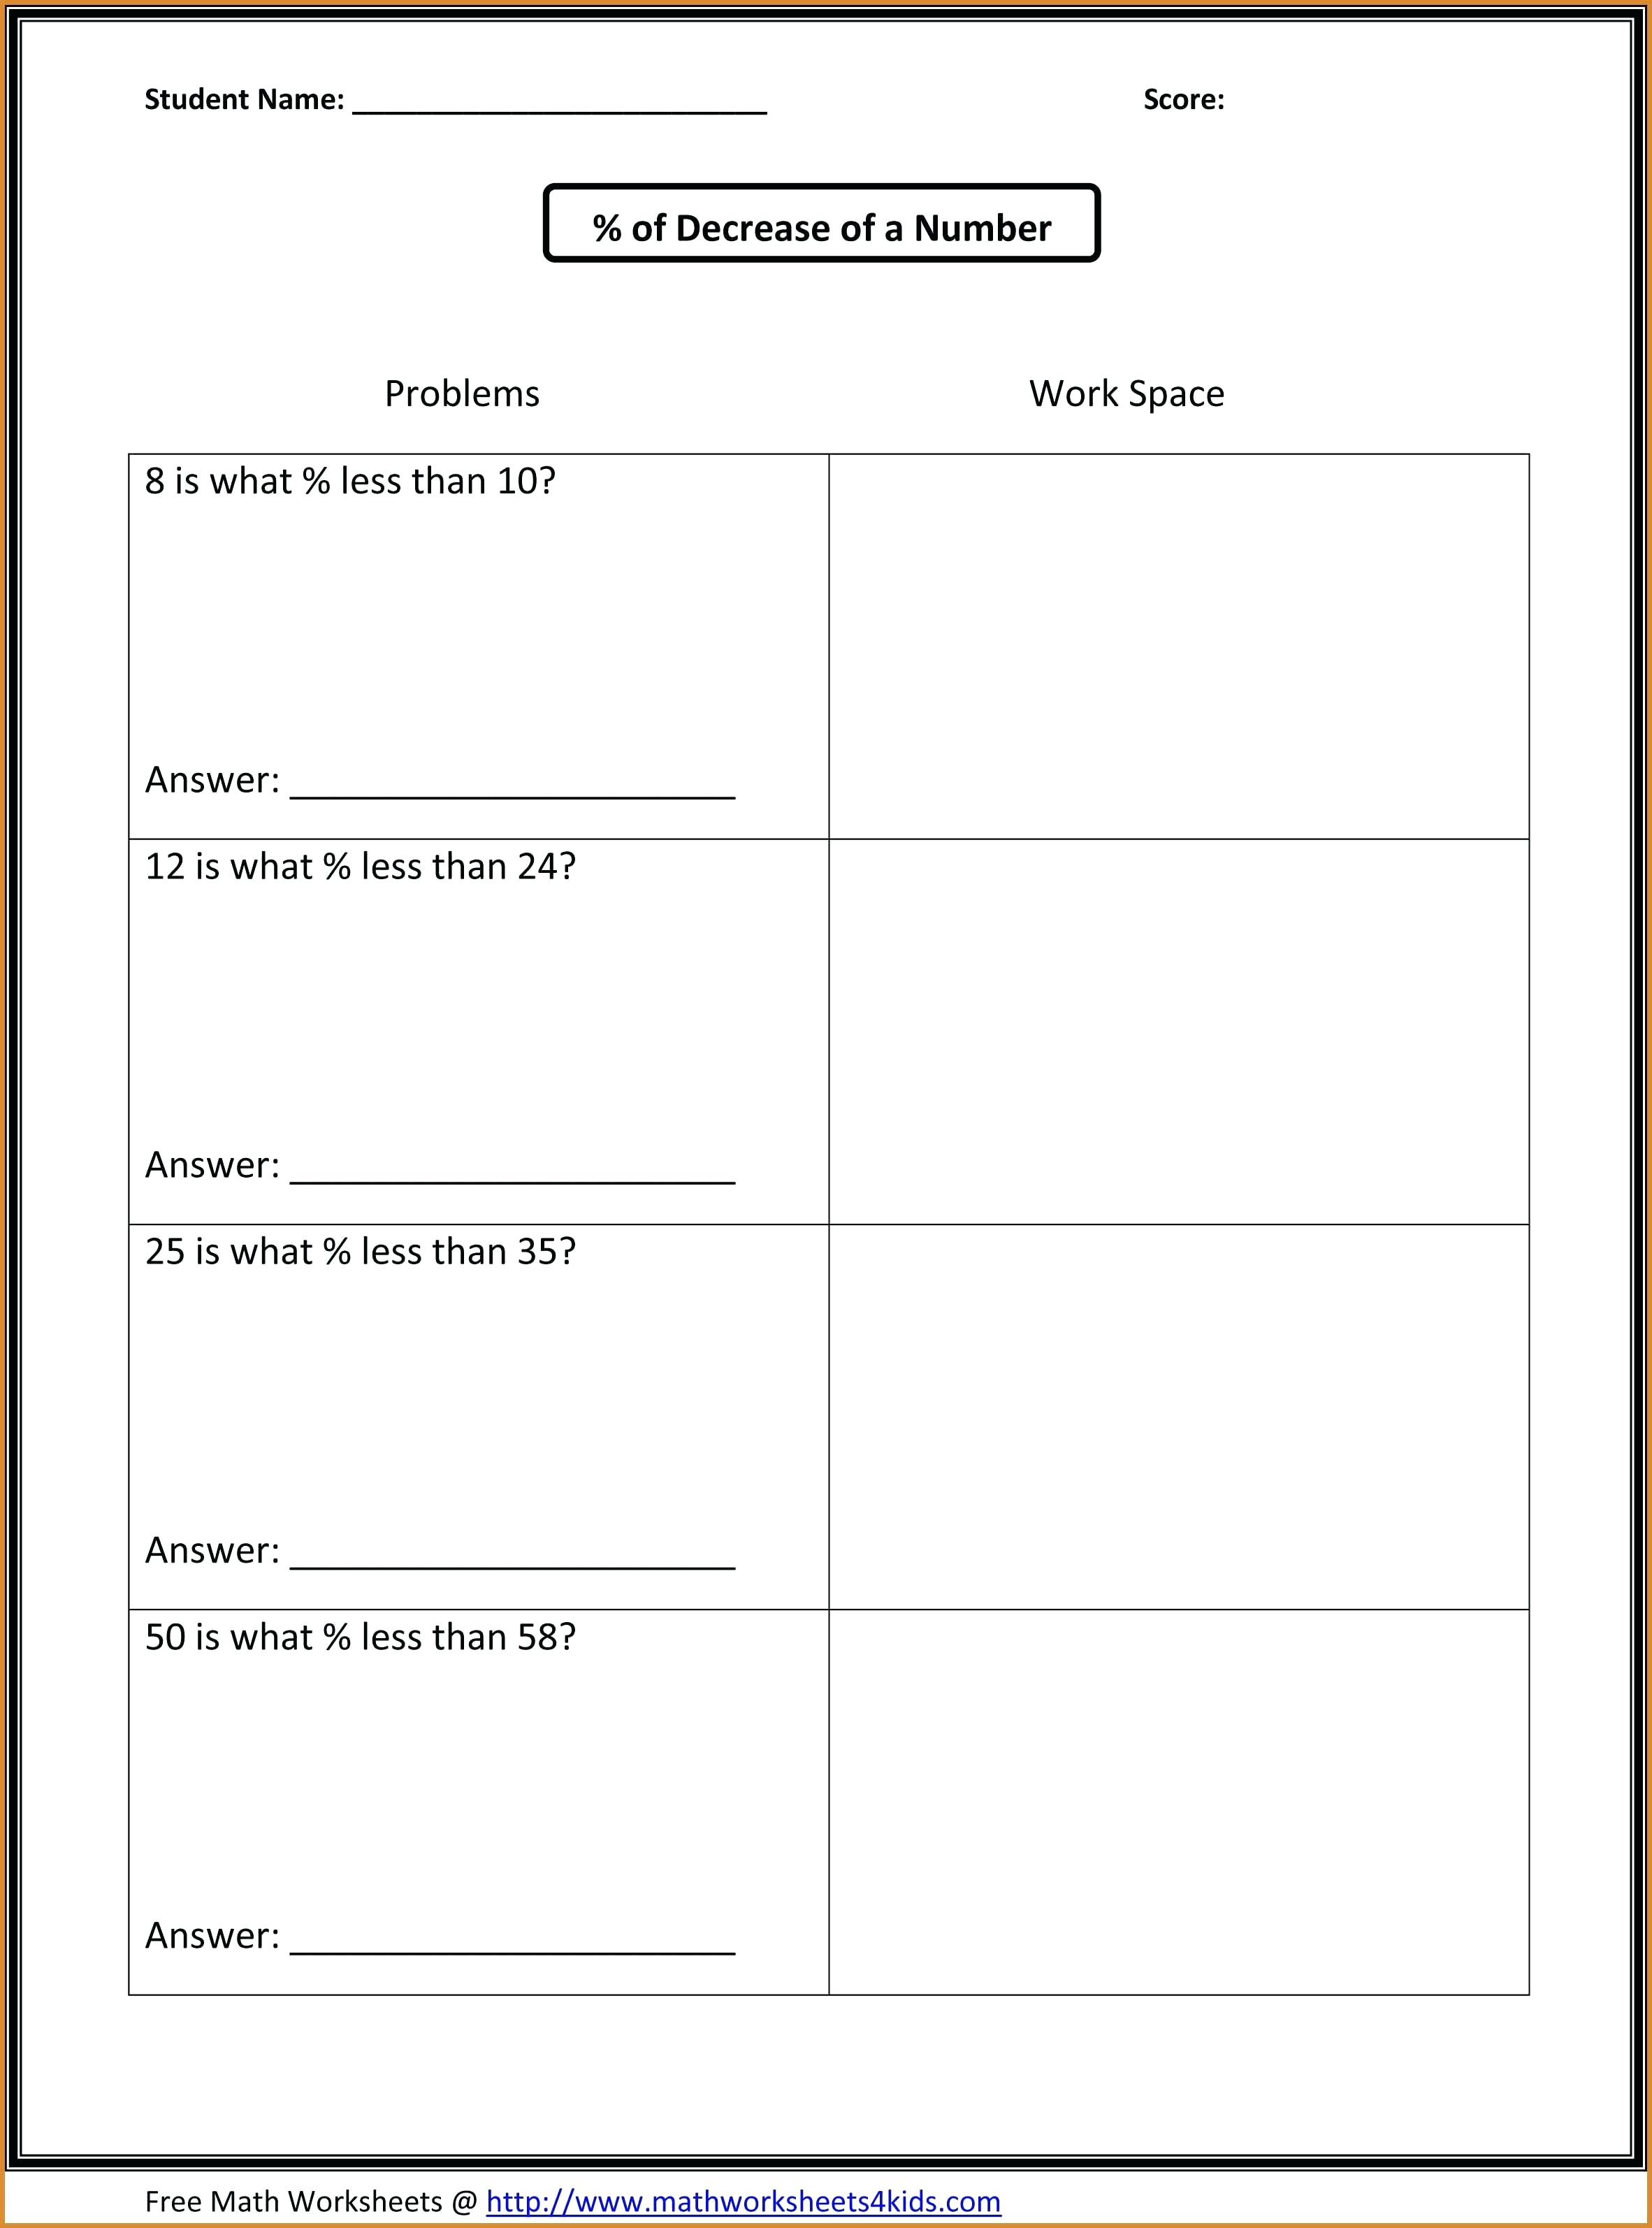 Math Problems For 7Th Graders Collection Of Free Math Problems For - 7Th Grade Math Worksheets Free Printable With Answers